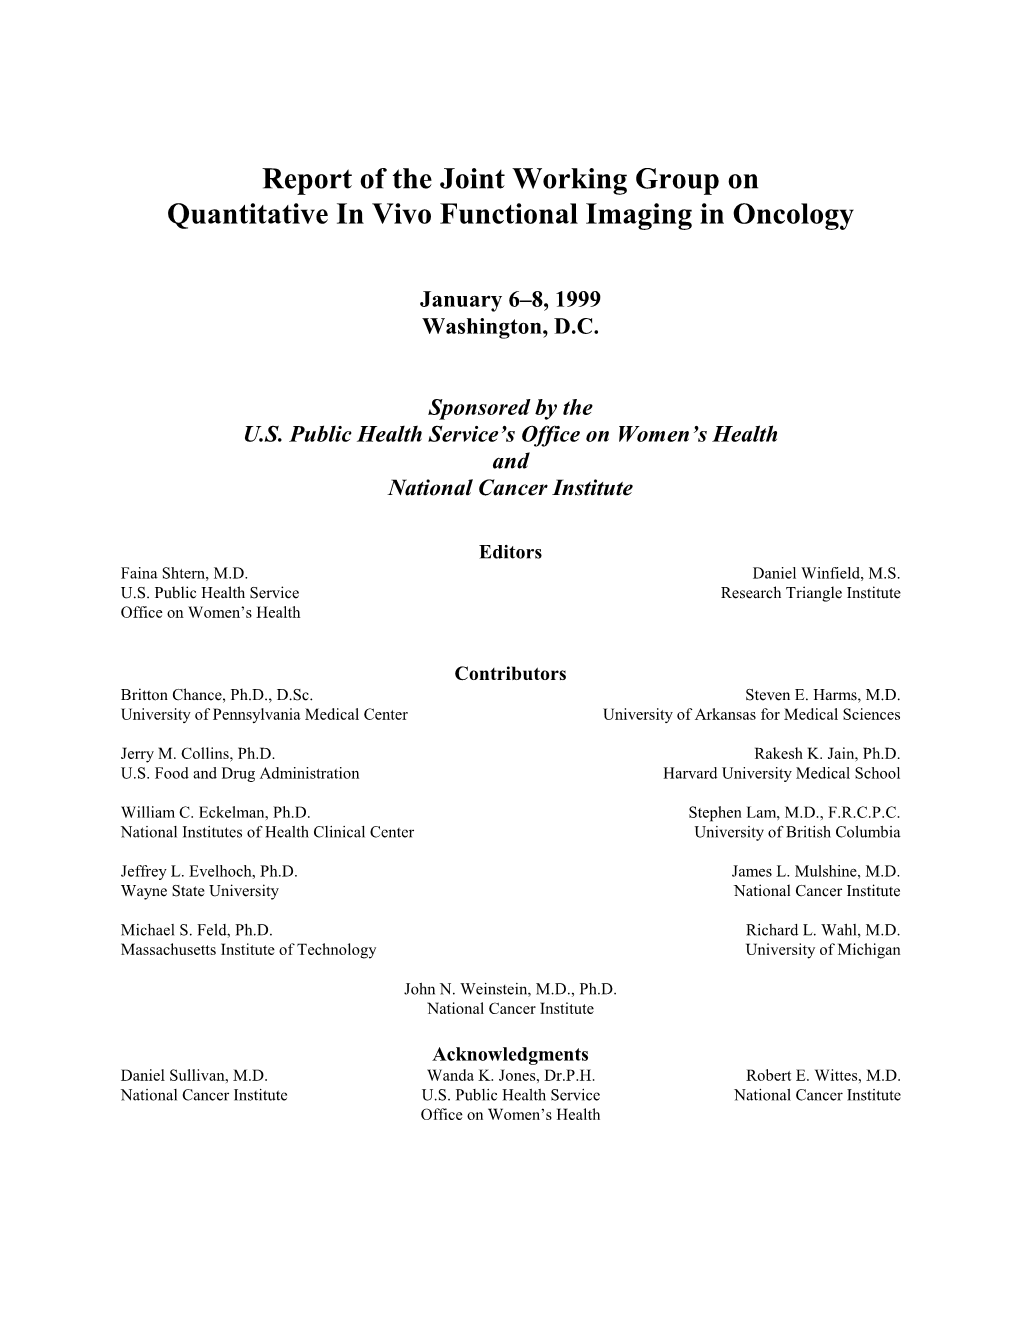 Report of the Joint Working Group on Quantitative in Vivo Functional Imaging in Oncology